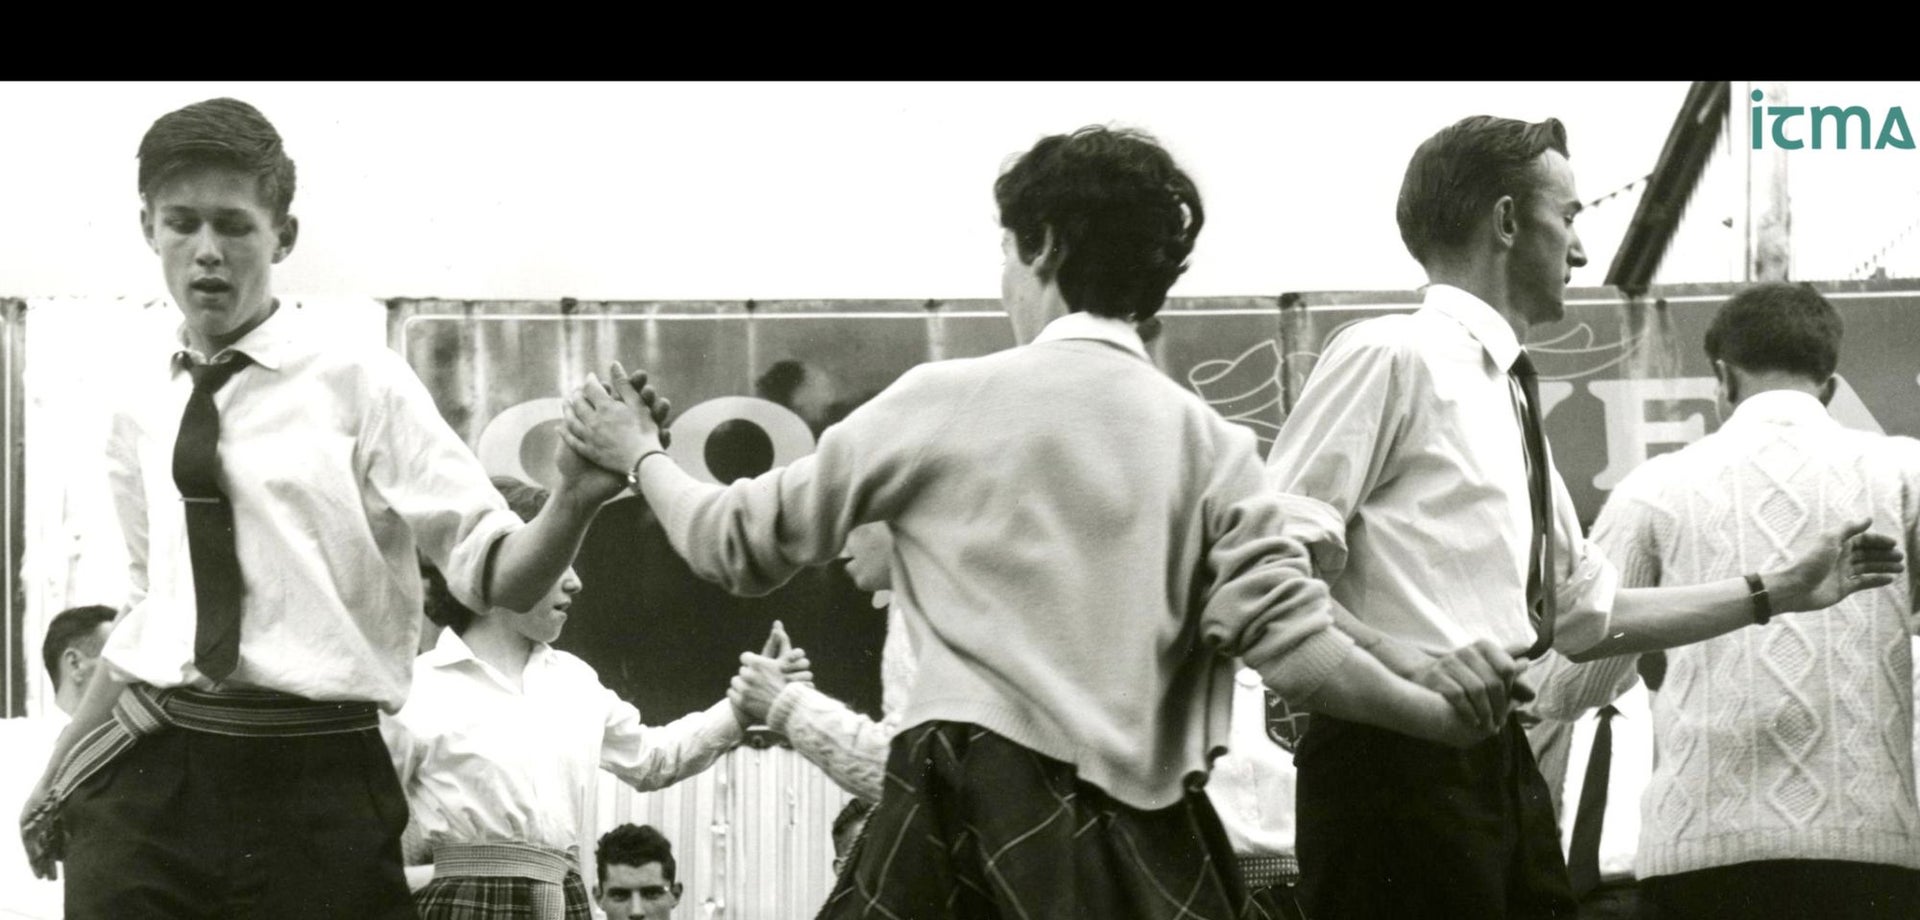 1950s black and white image of several couples dancing